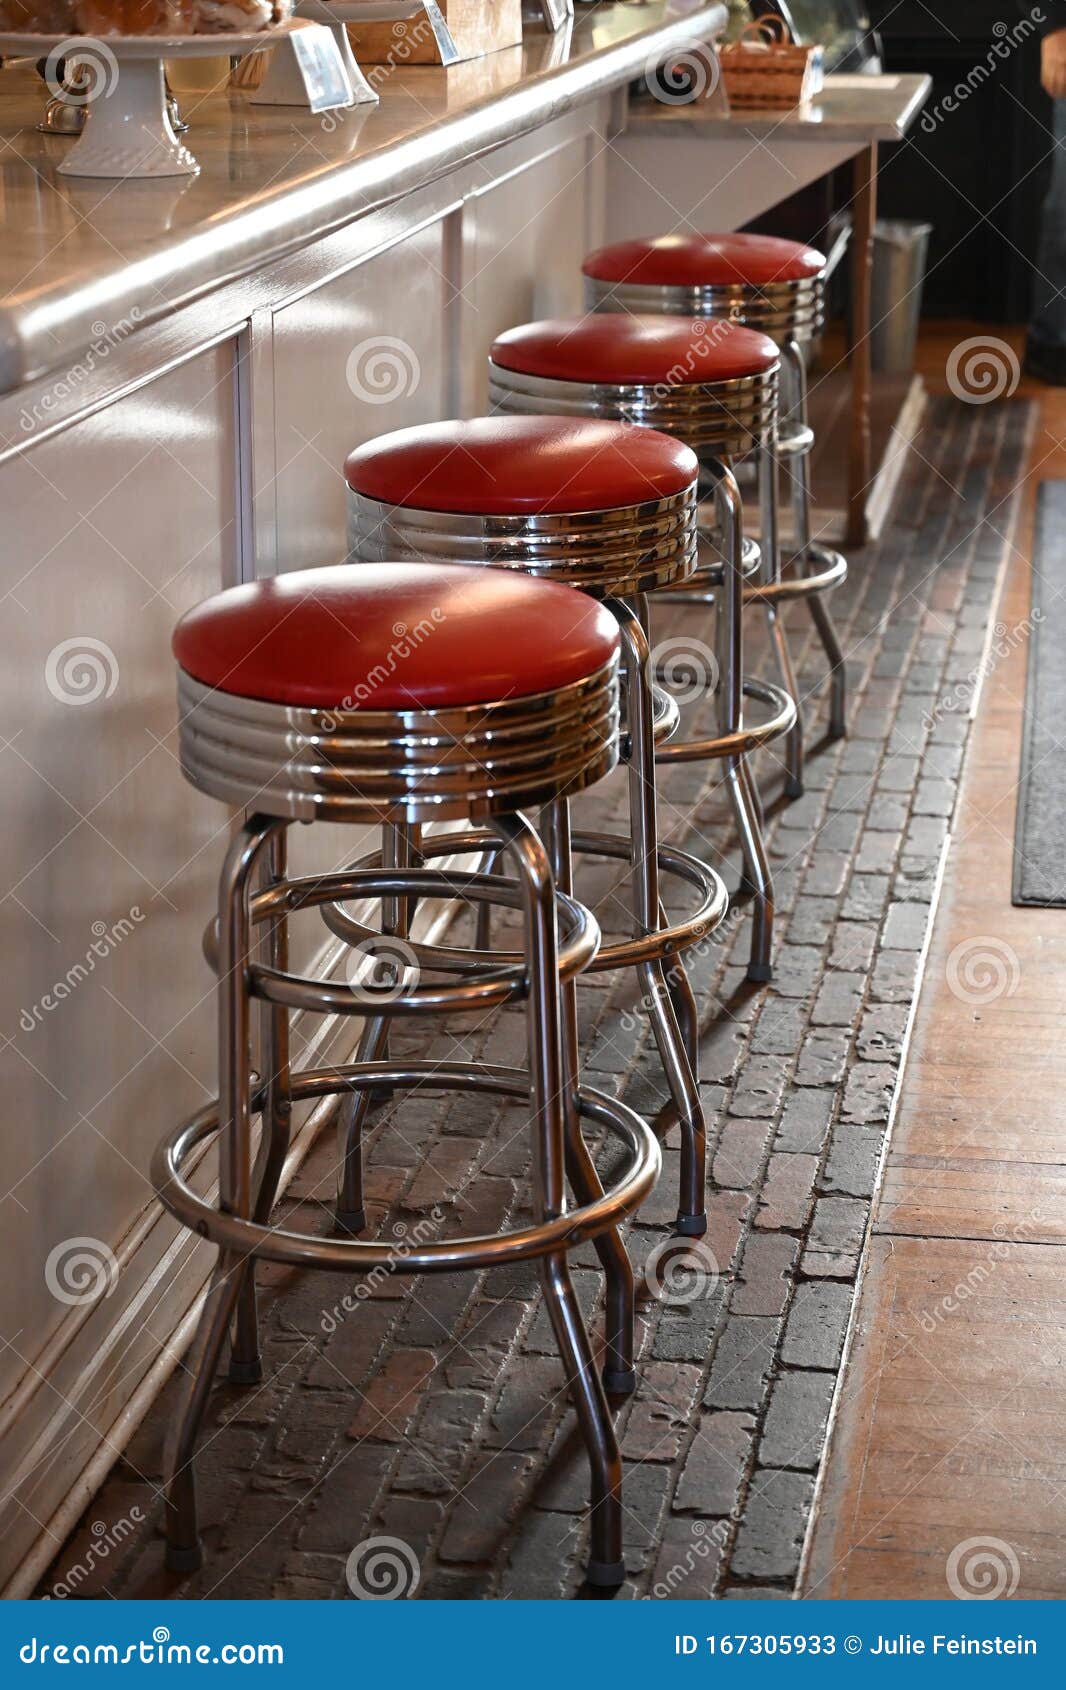 https://thumbs.dreamstime.com/z/soda-fountain-stools-old-fashioned-stools-kind-found-counter-ice-cream-parlor-soda-fountains-167305933.jpg